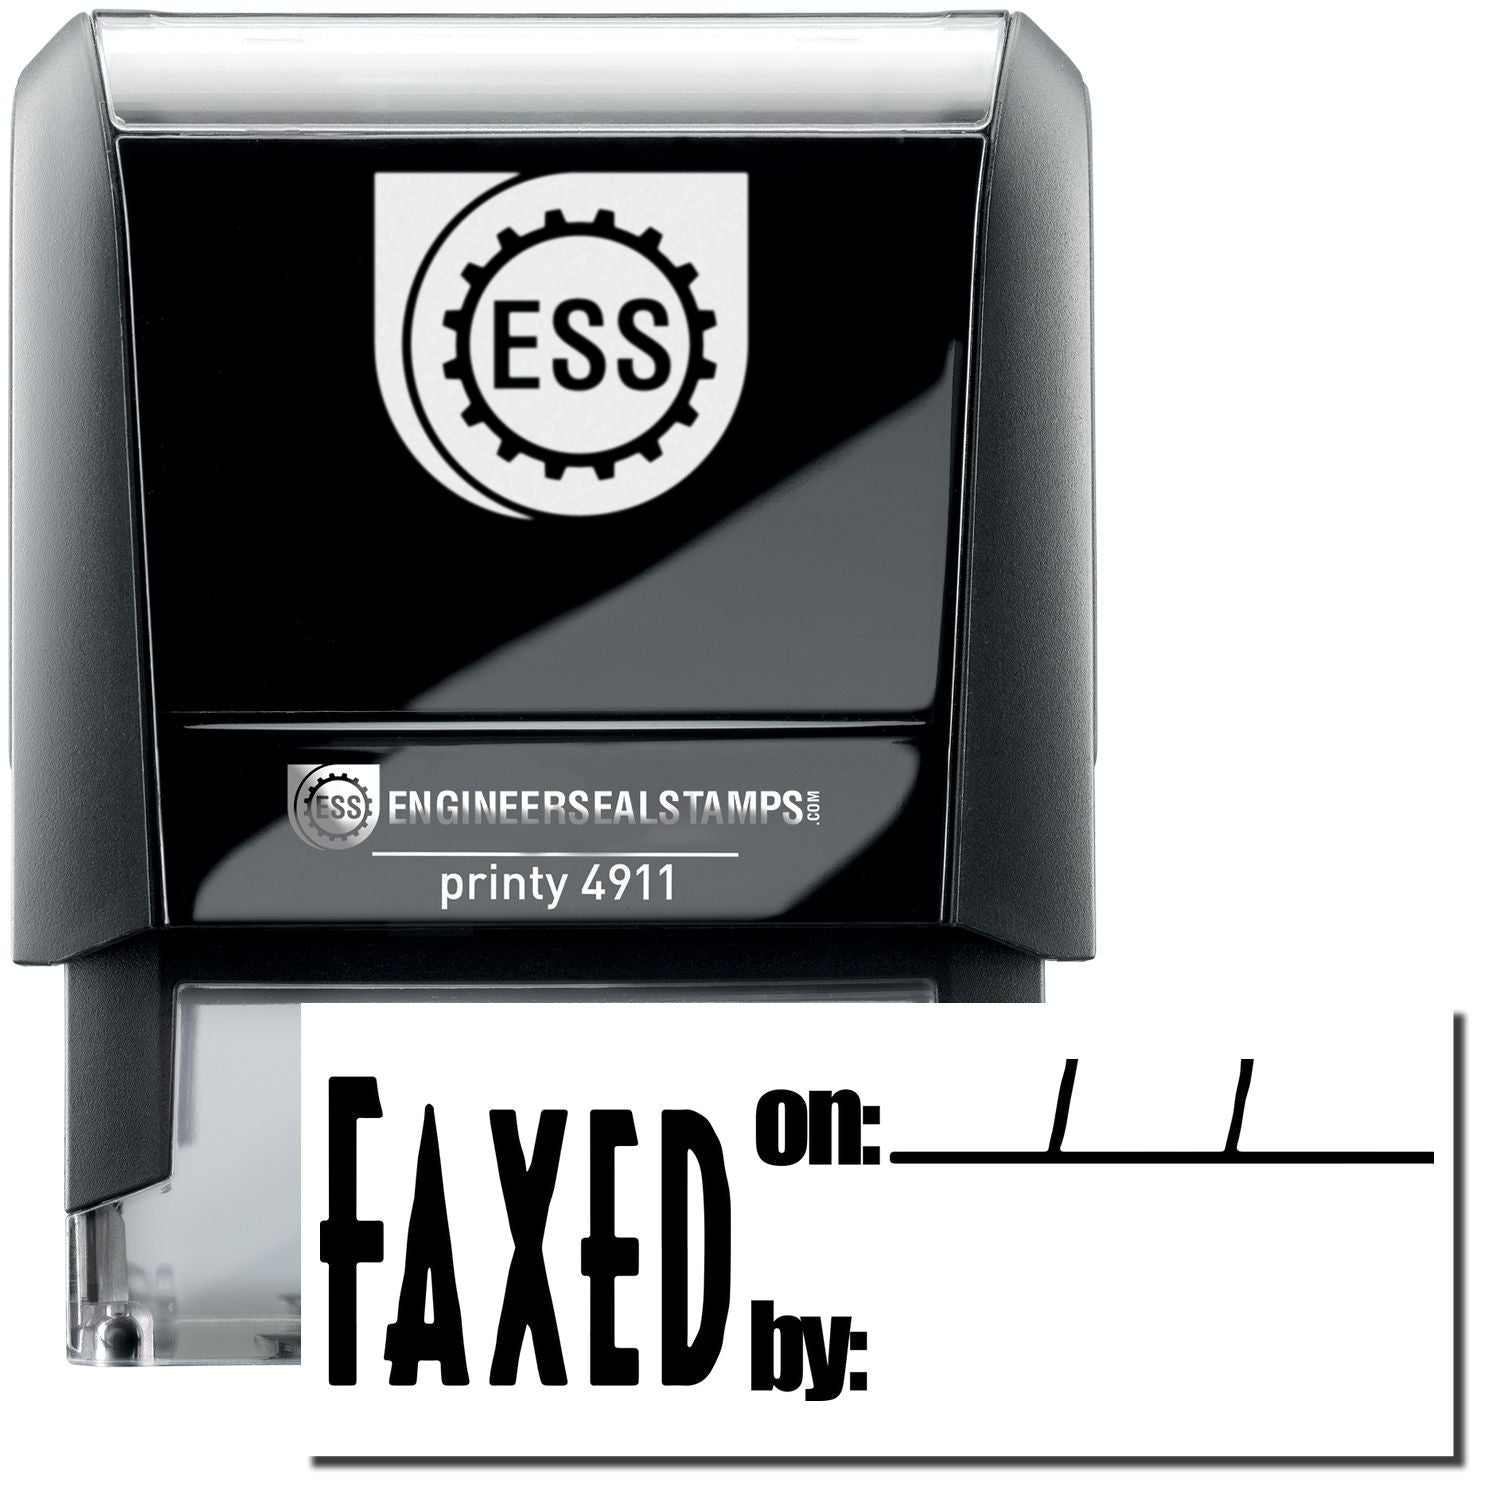 A self-inking stamp with a stamped image showing how the text "FAXED on: by:" (with space for writing the date and the name of the person from whom the fax is received is given) is displayed after stamping.